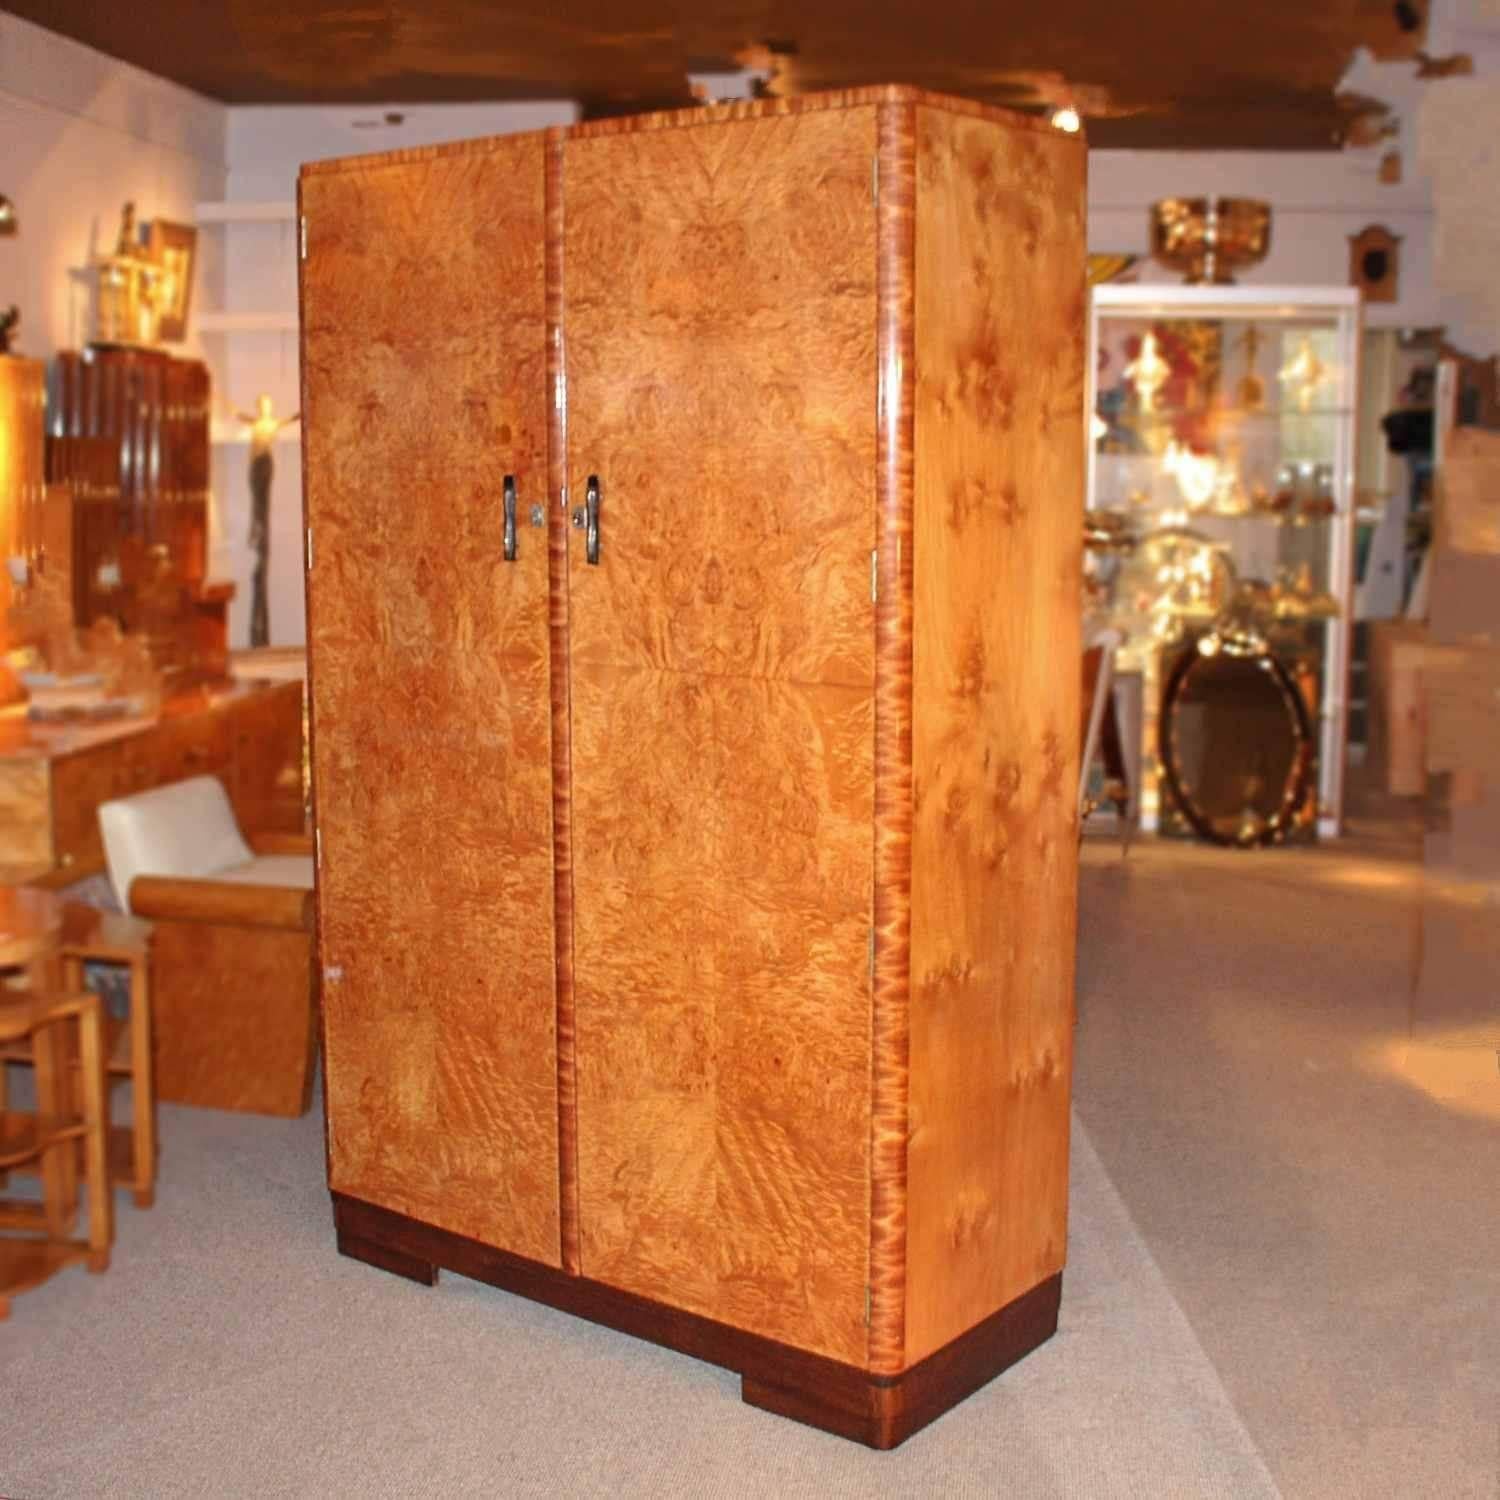 An Art Deco double wardrobe in burr satin wood, satin birch banding and figured walnut sides. Set over a stepped oak base. Original bakelite and metal handles with push button lock release. Interior with two separate handgun rails and original hooks